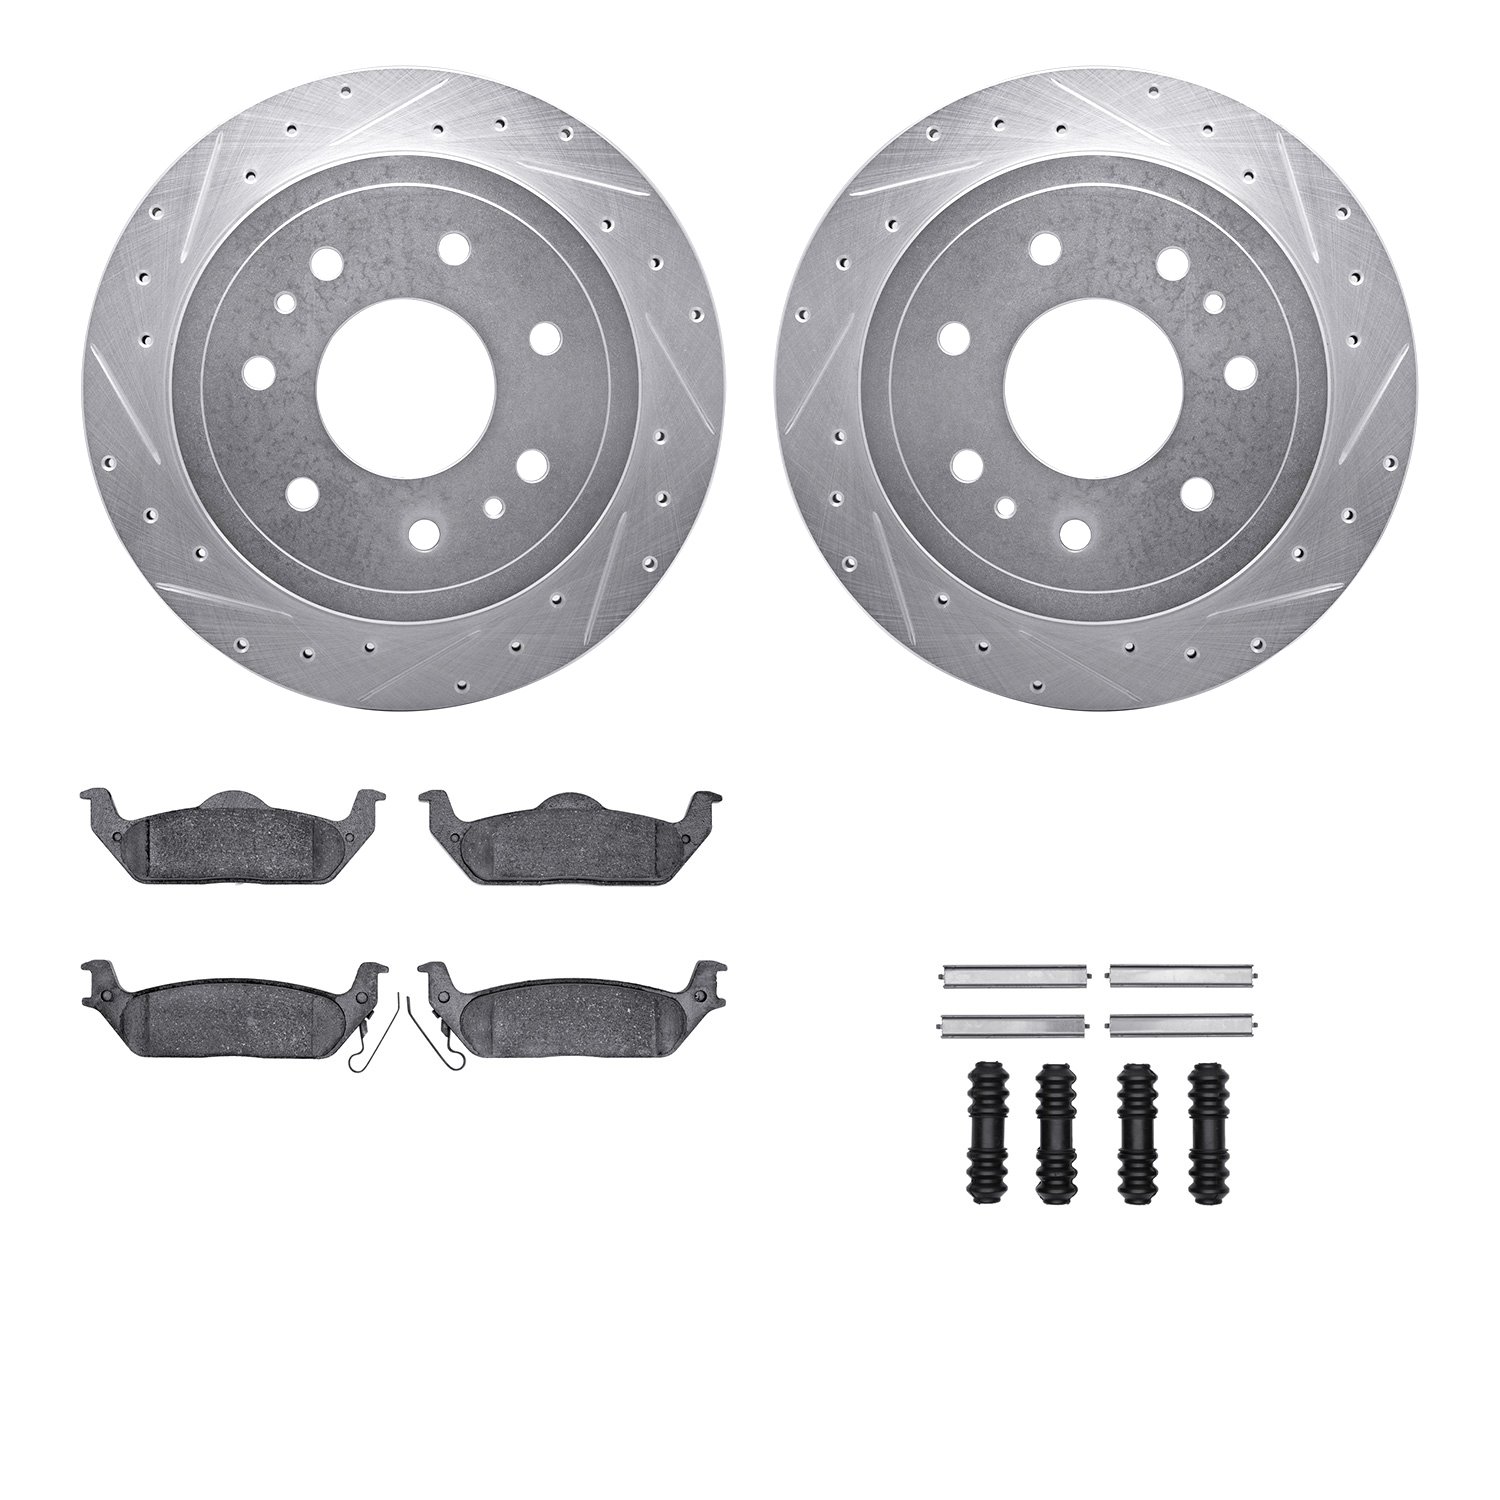 7212-99188 Drilled/Slotted Rotors w/Heavy-Duty Brake Pads Kit & Hardware [Silver], 2004-2011 Ford/Lincoln/Mercury/Mazda, Positio